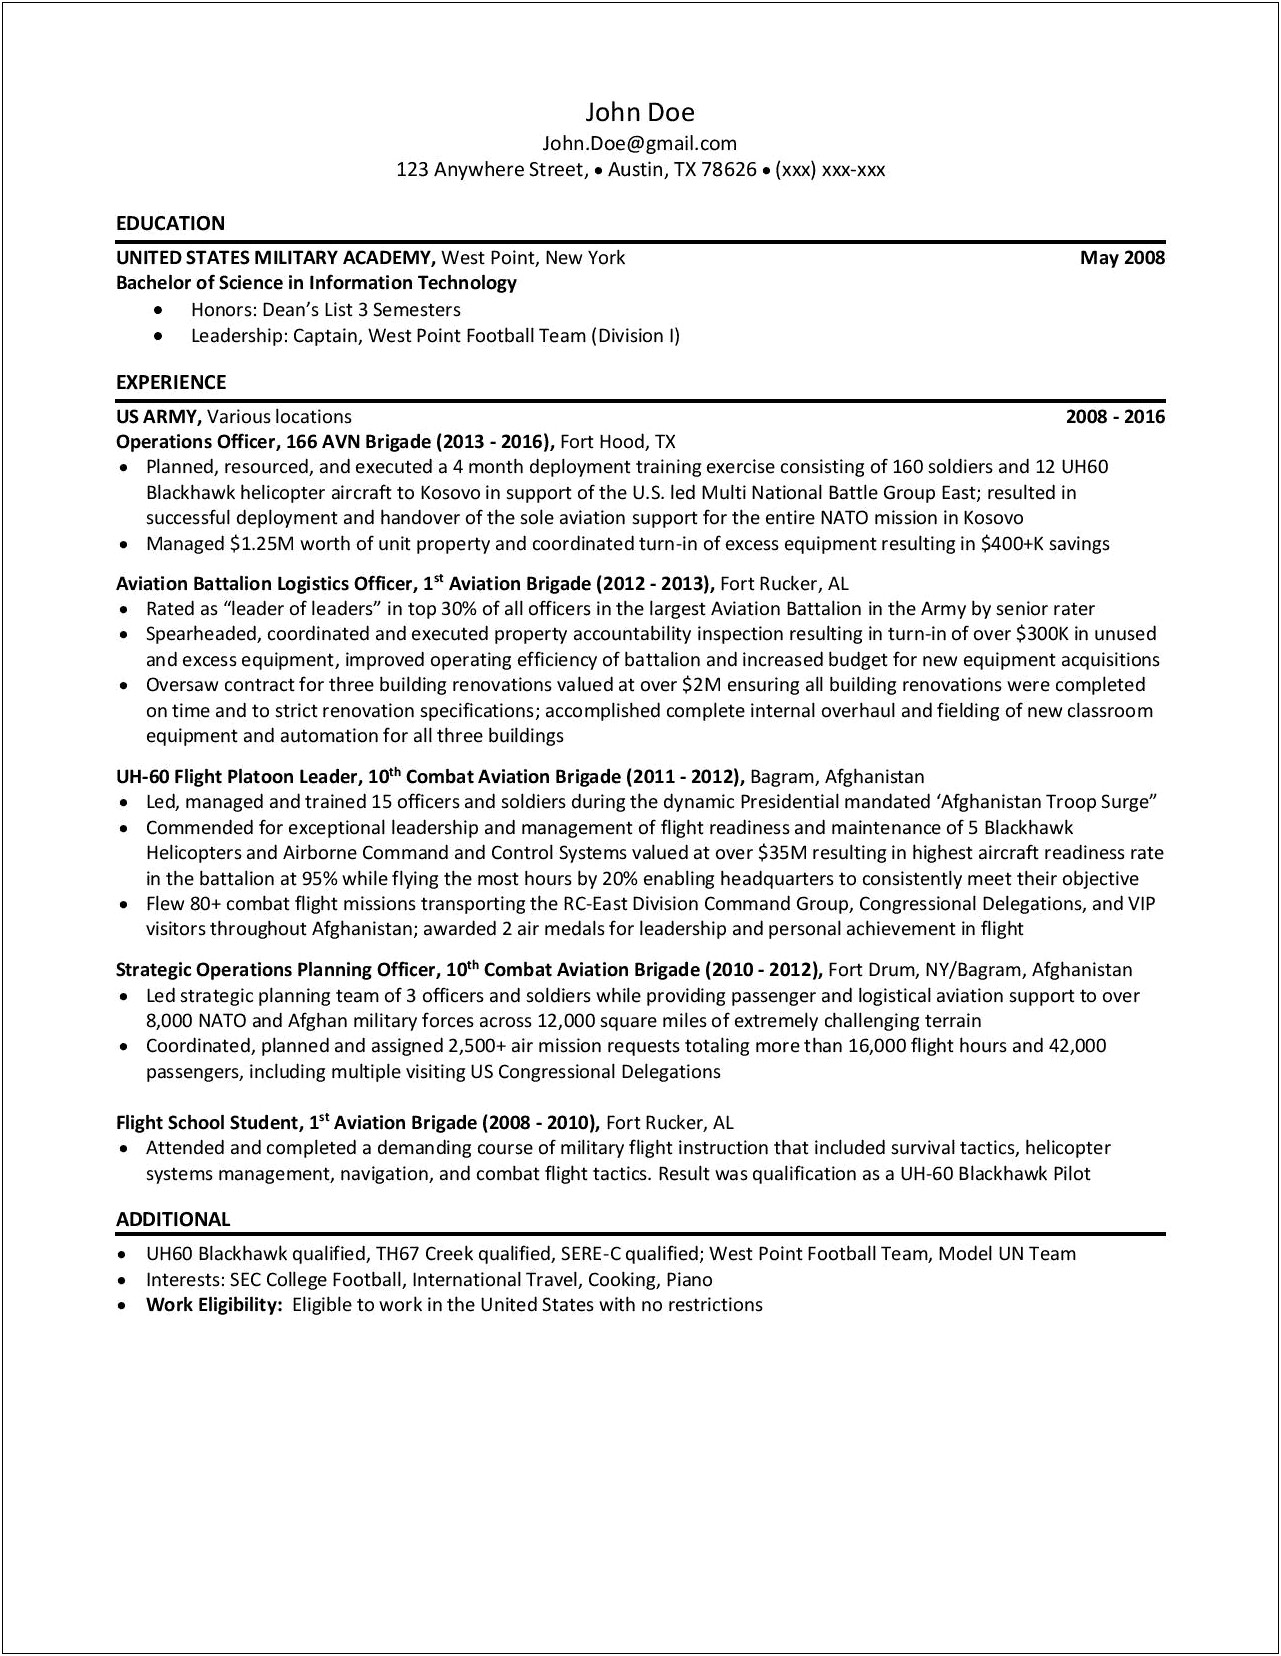 Resume Template For Military To Civilian